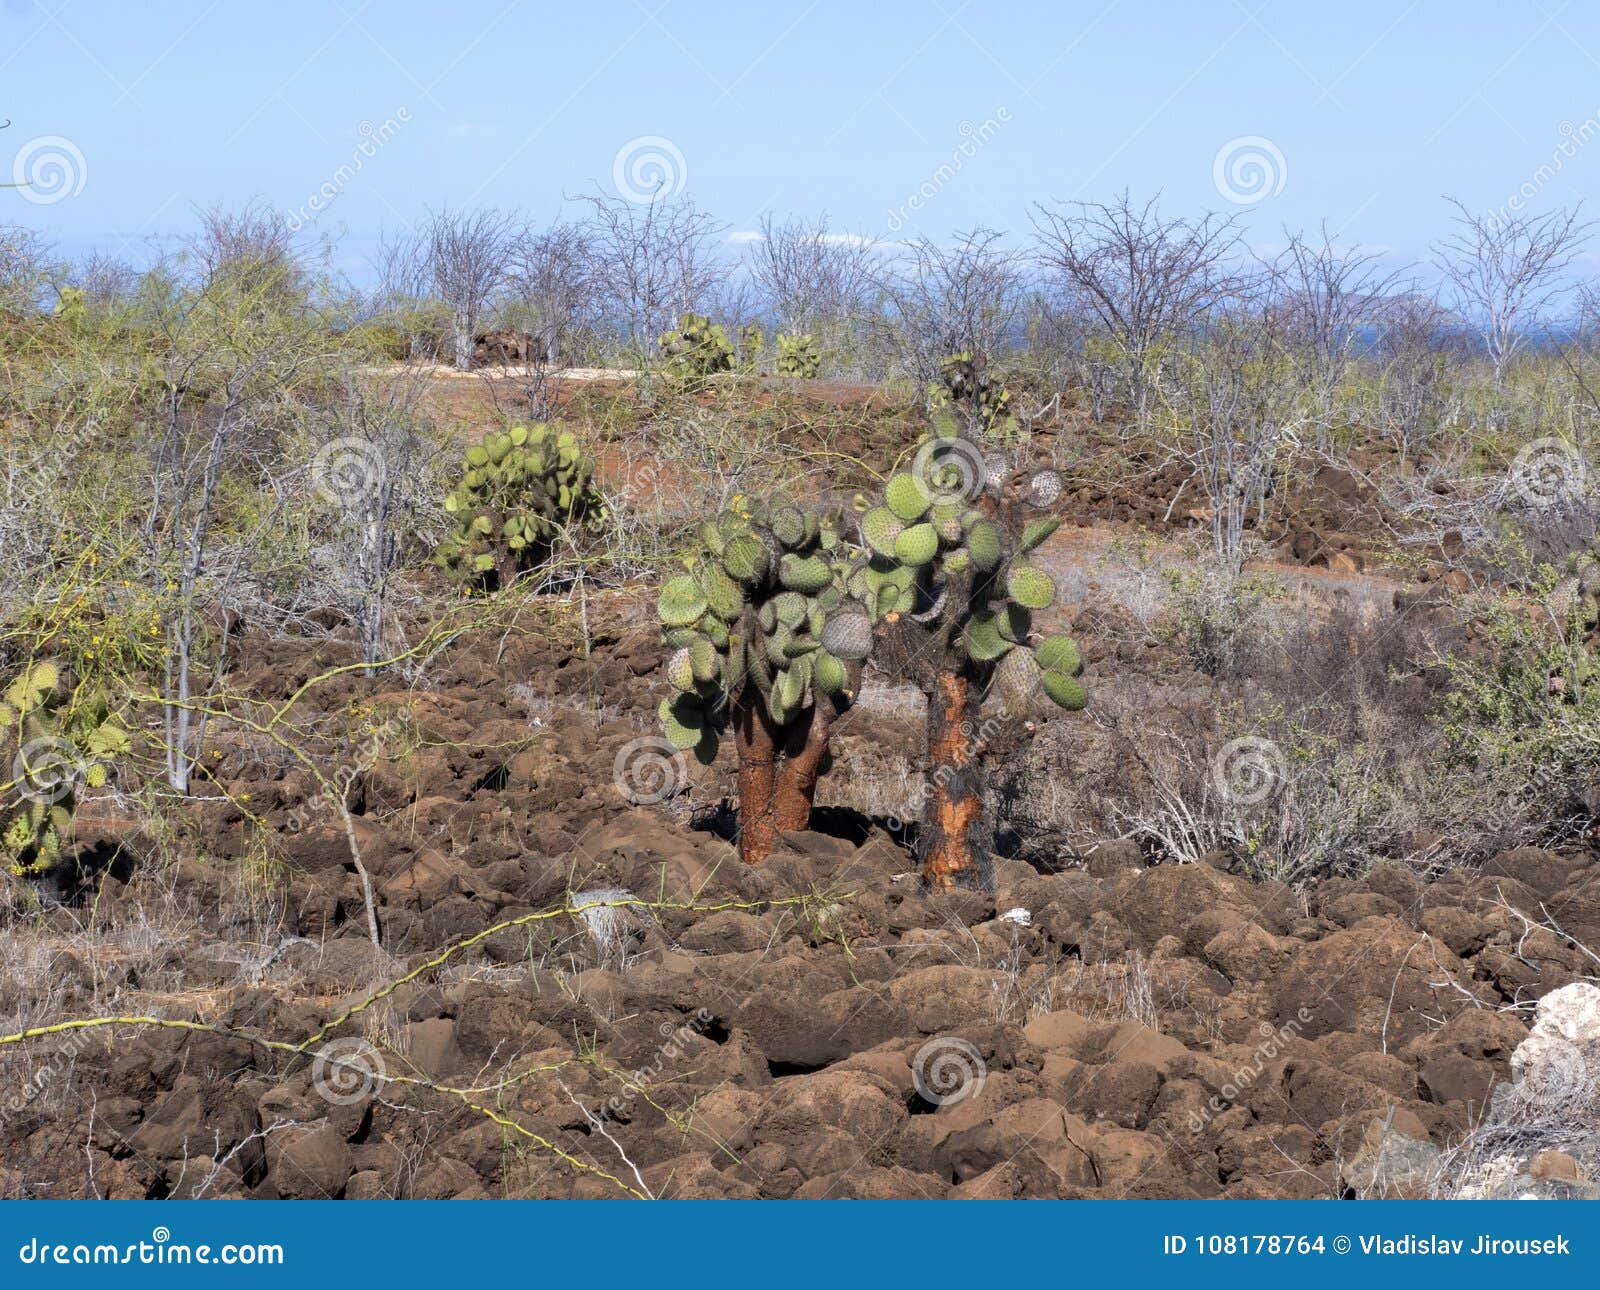 the landscape on the baltra island is made up of lava stones, galapagos, ecuador